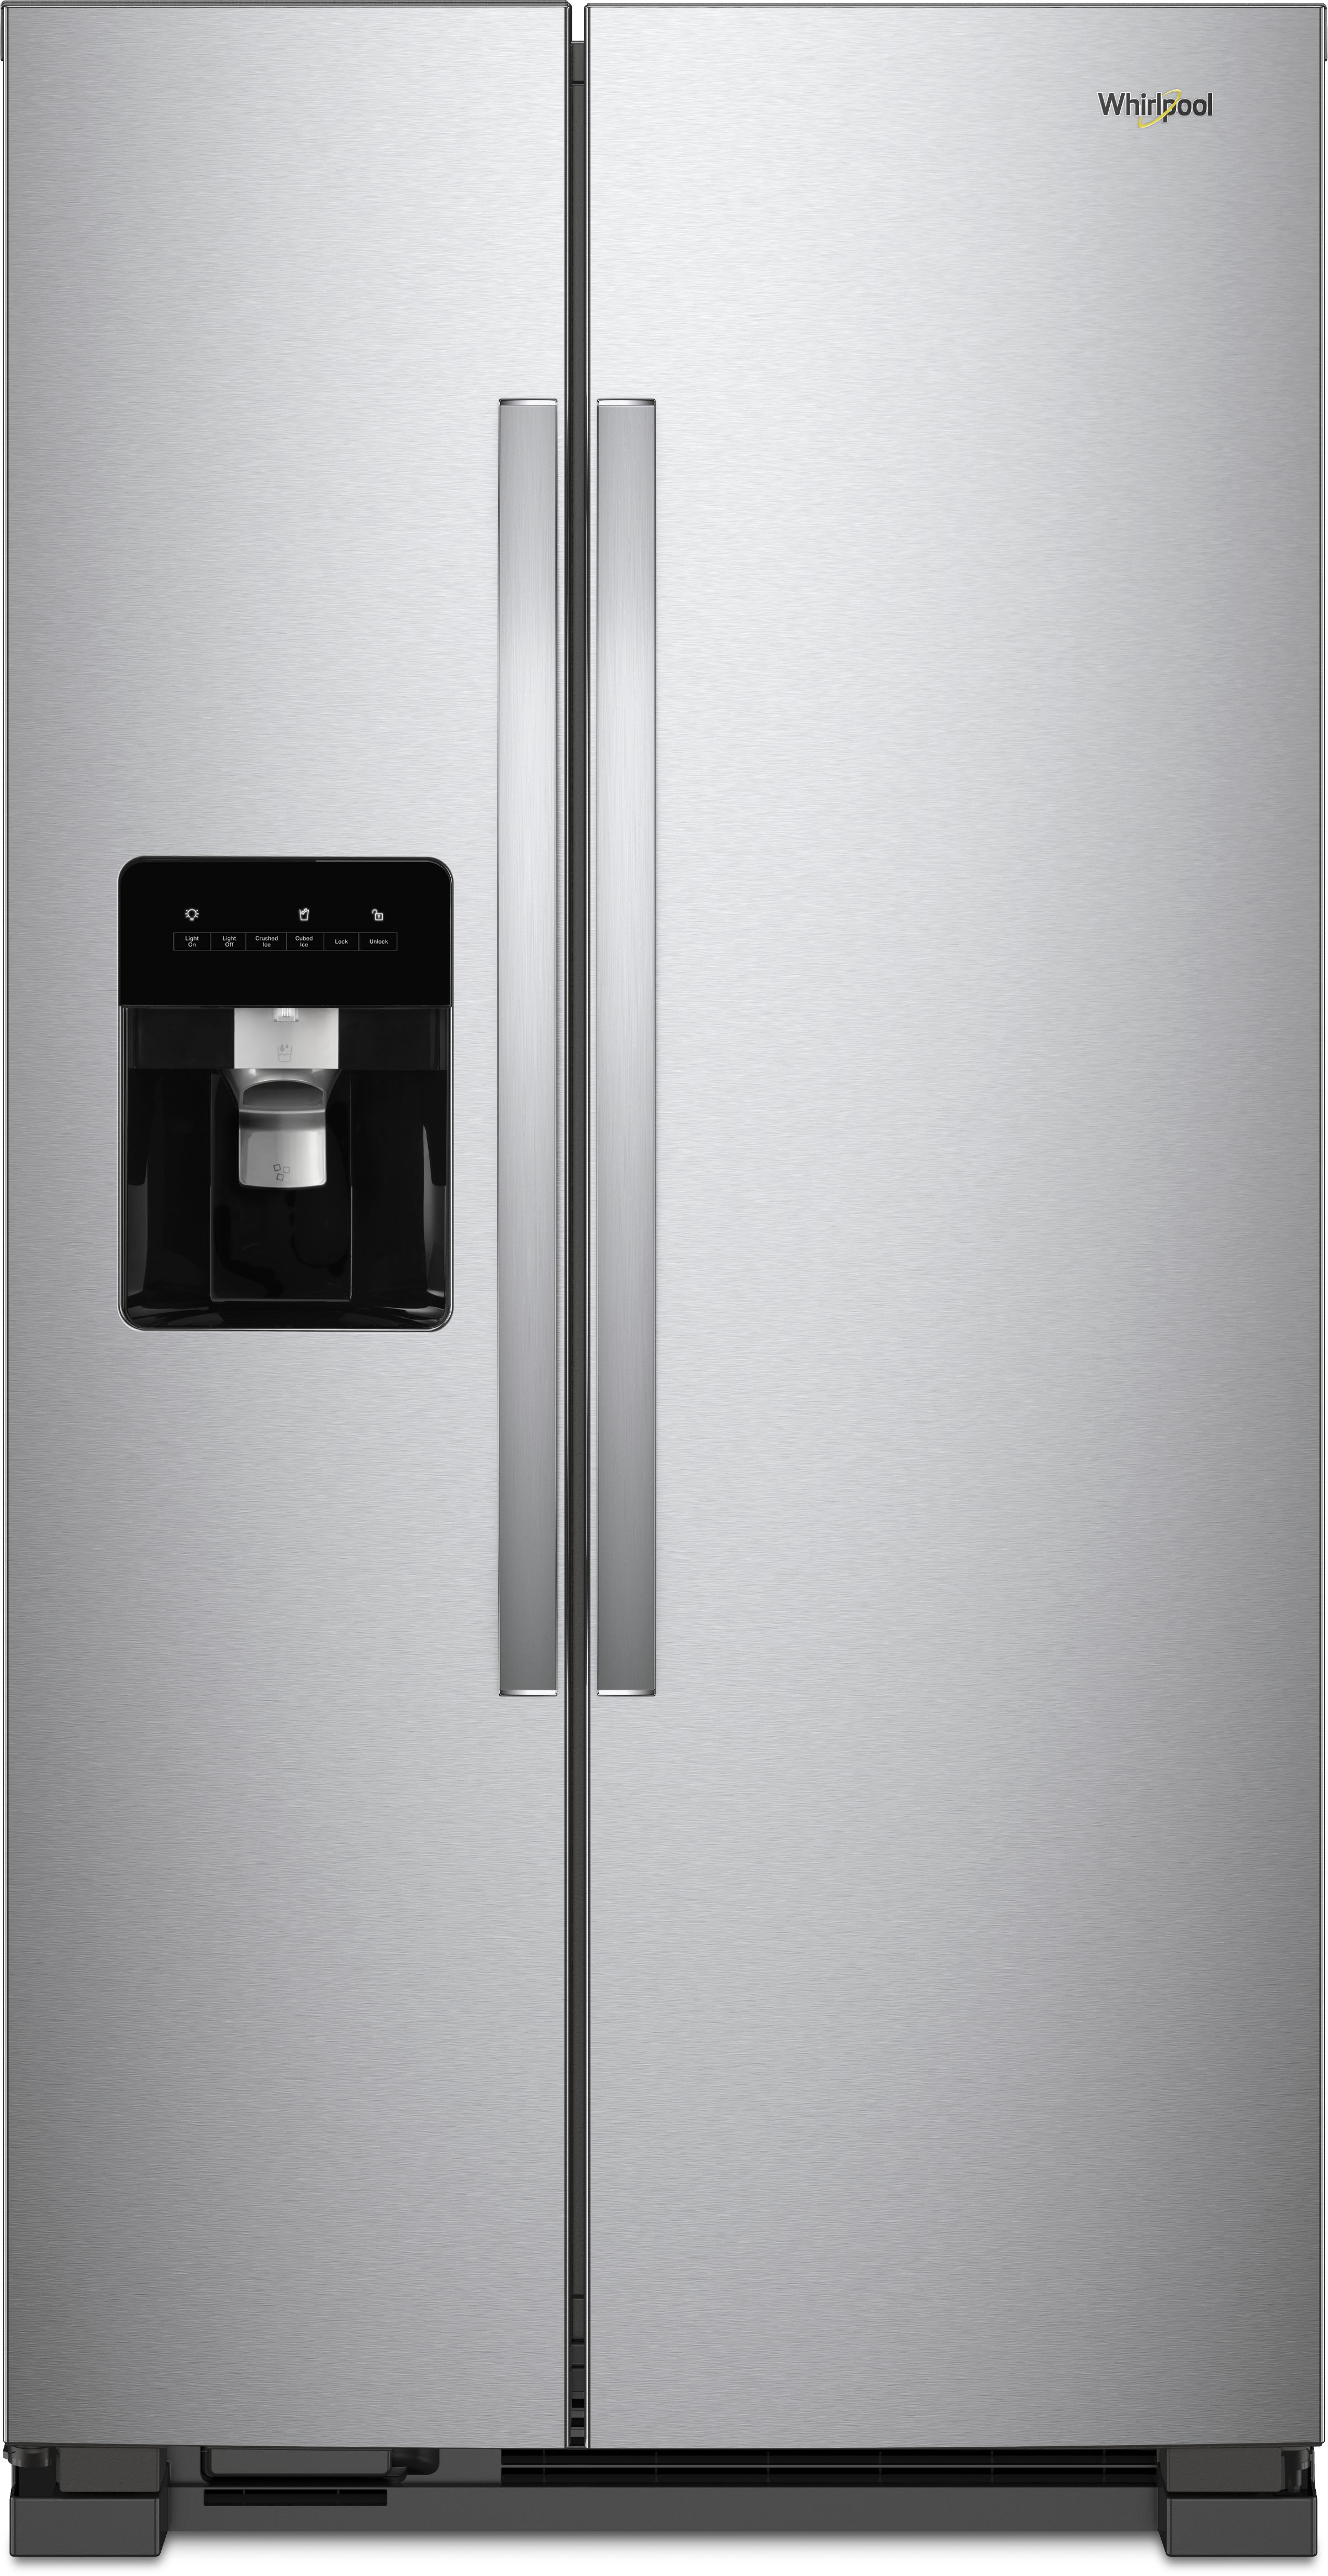 Whirlpool® 21.4 Cu. Ft. Monochromatic Stainless Steel Side-By-Side Refrigerator